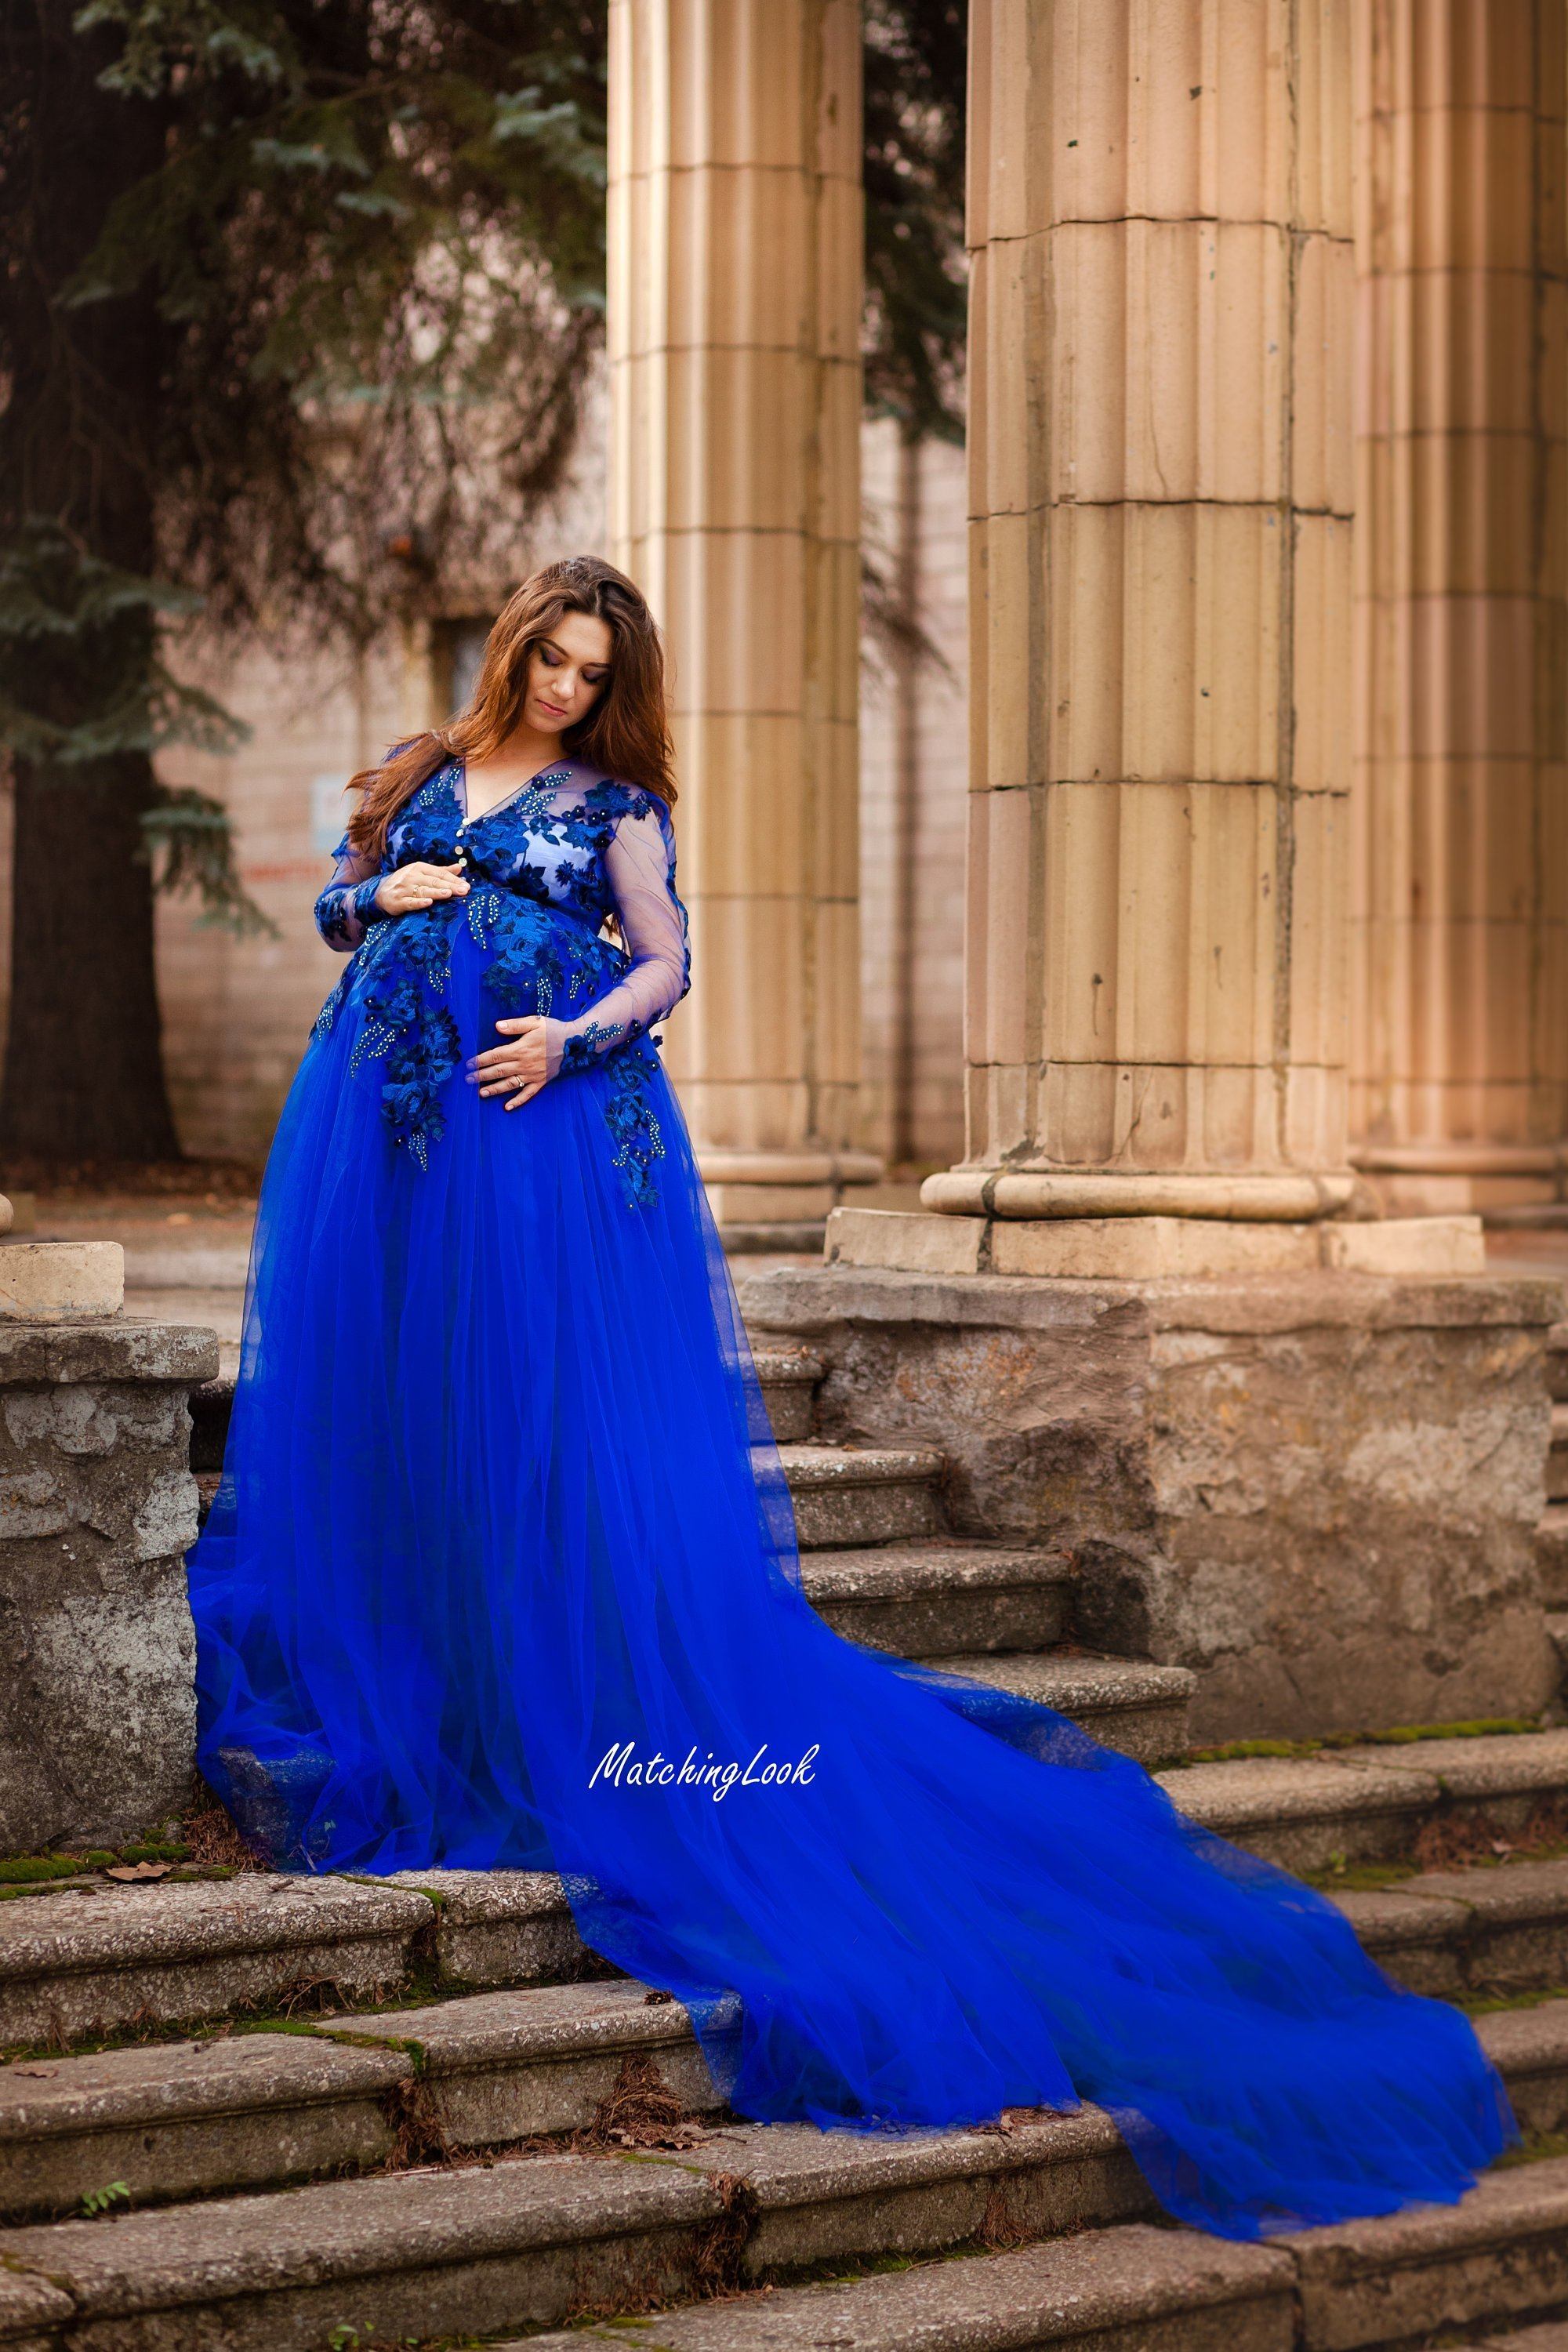 Royal Blue Maternity Dress, Photo Prop Dress, Maternity Gown for Photo